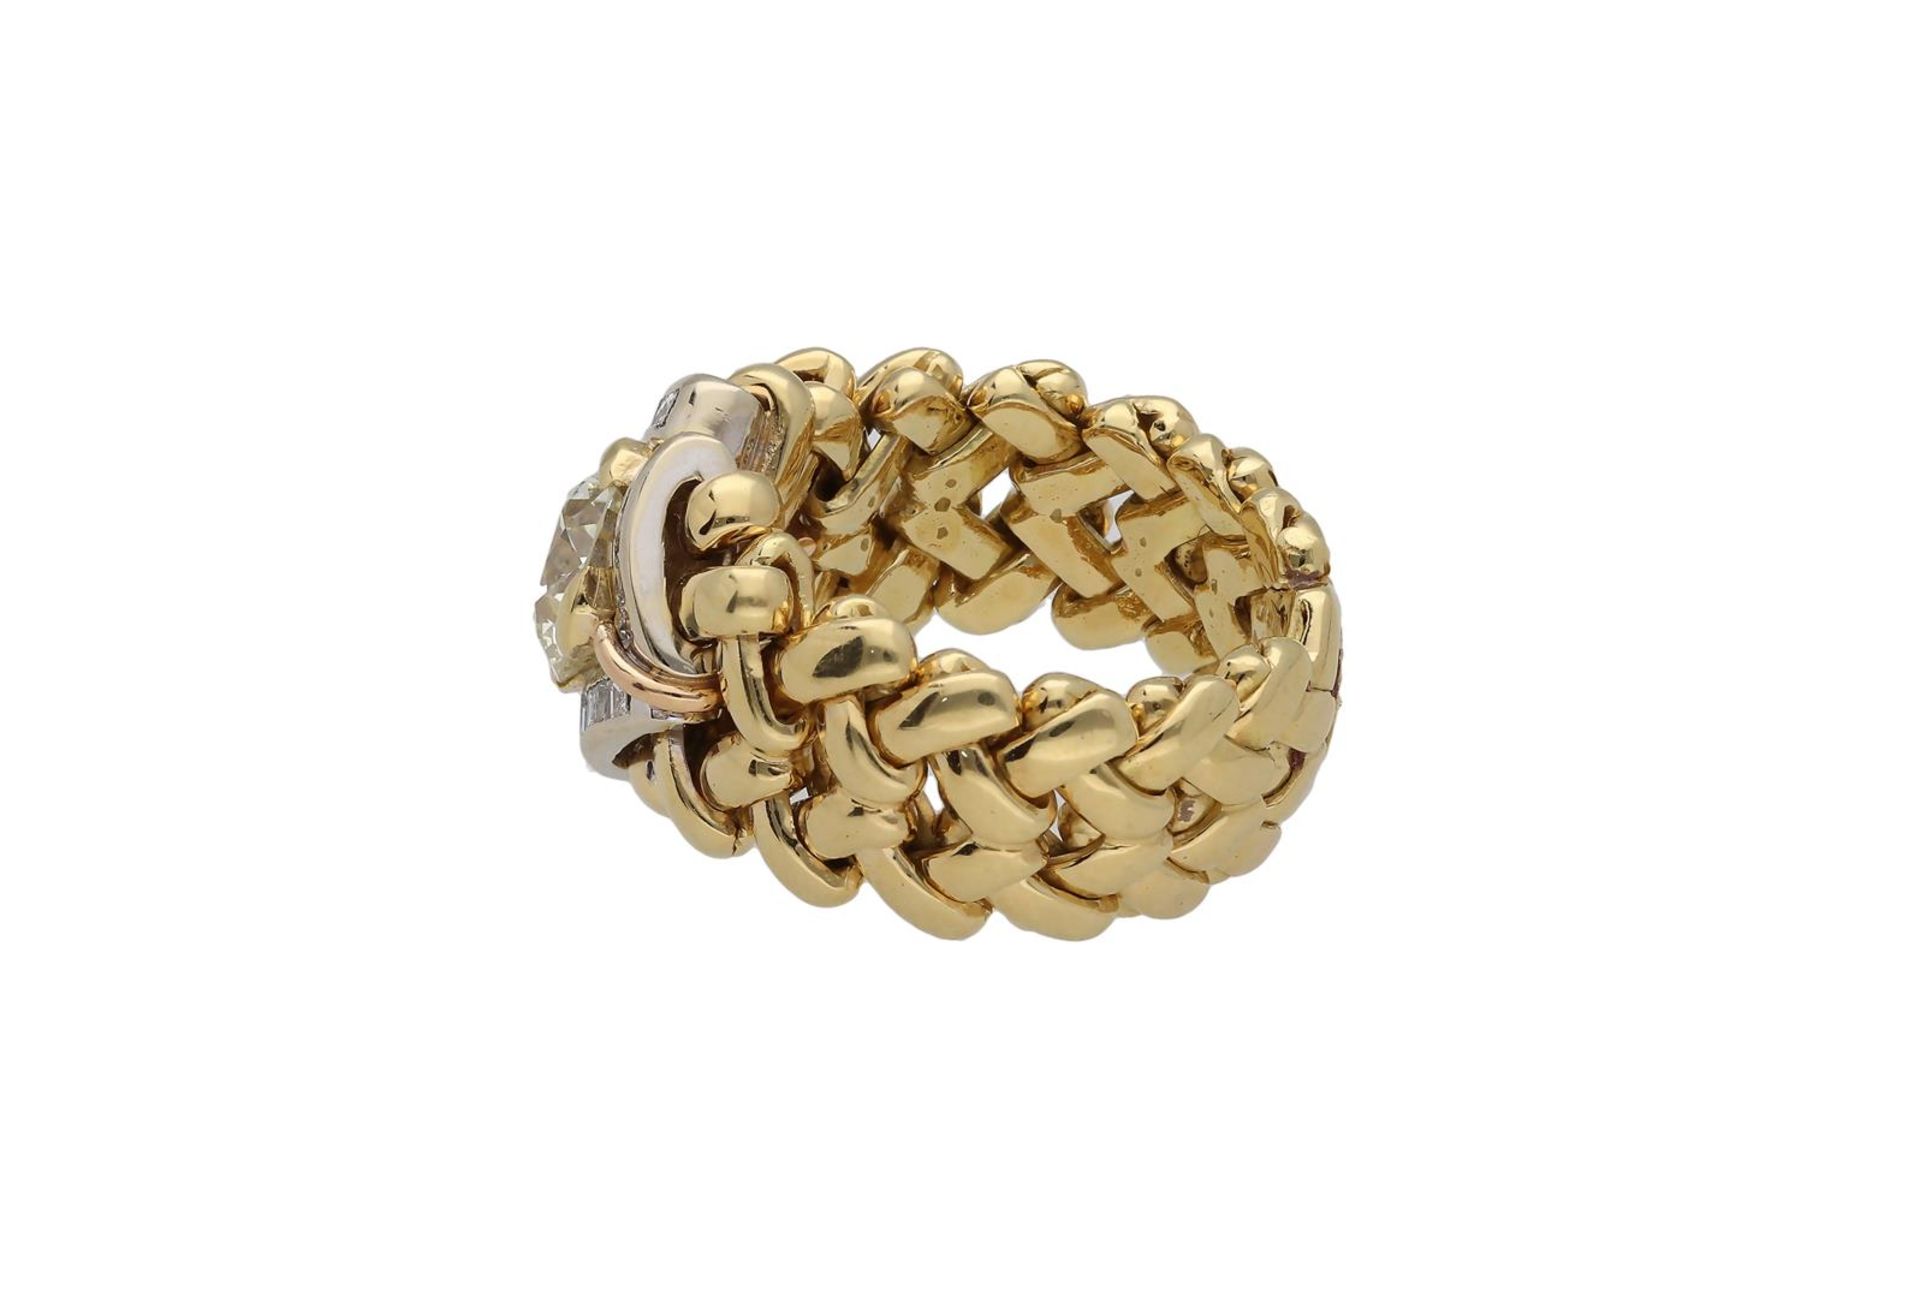 A 18-kt gold Cuban link ring, makers mark, Brev. 24PD, Vittorio Cesca, set with a european transitio - Image 4 of 4